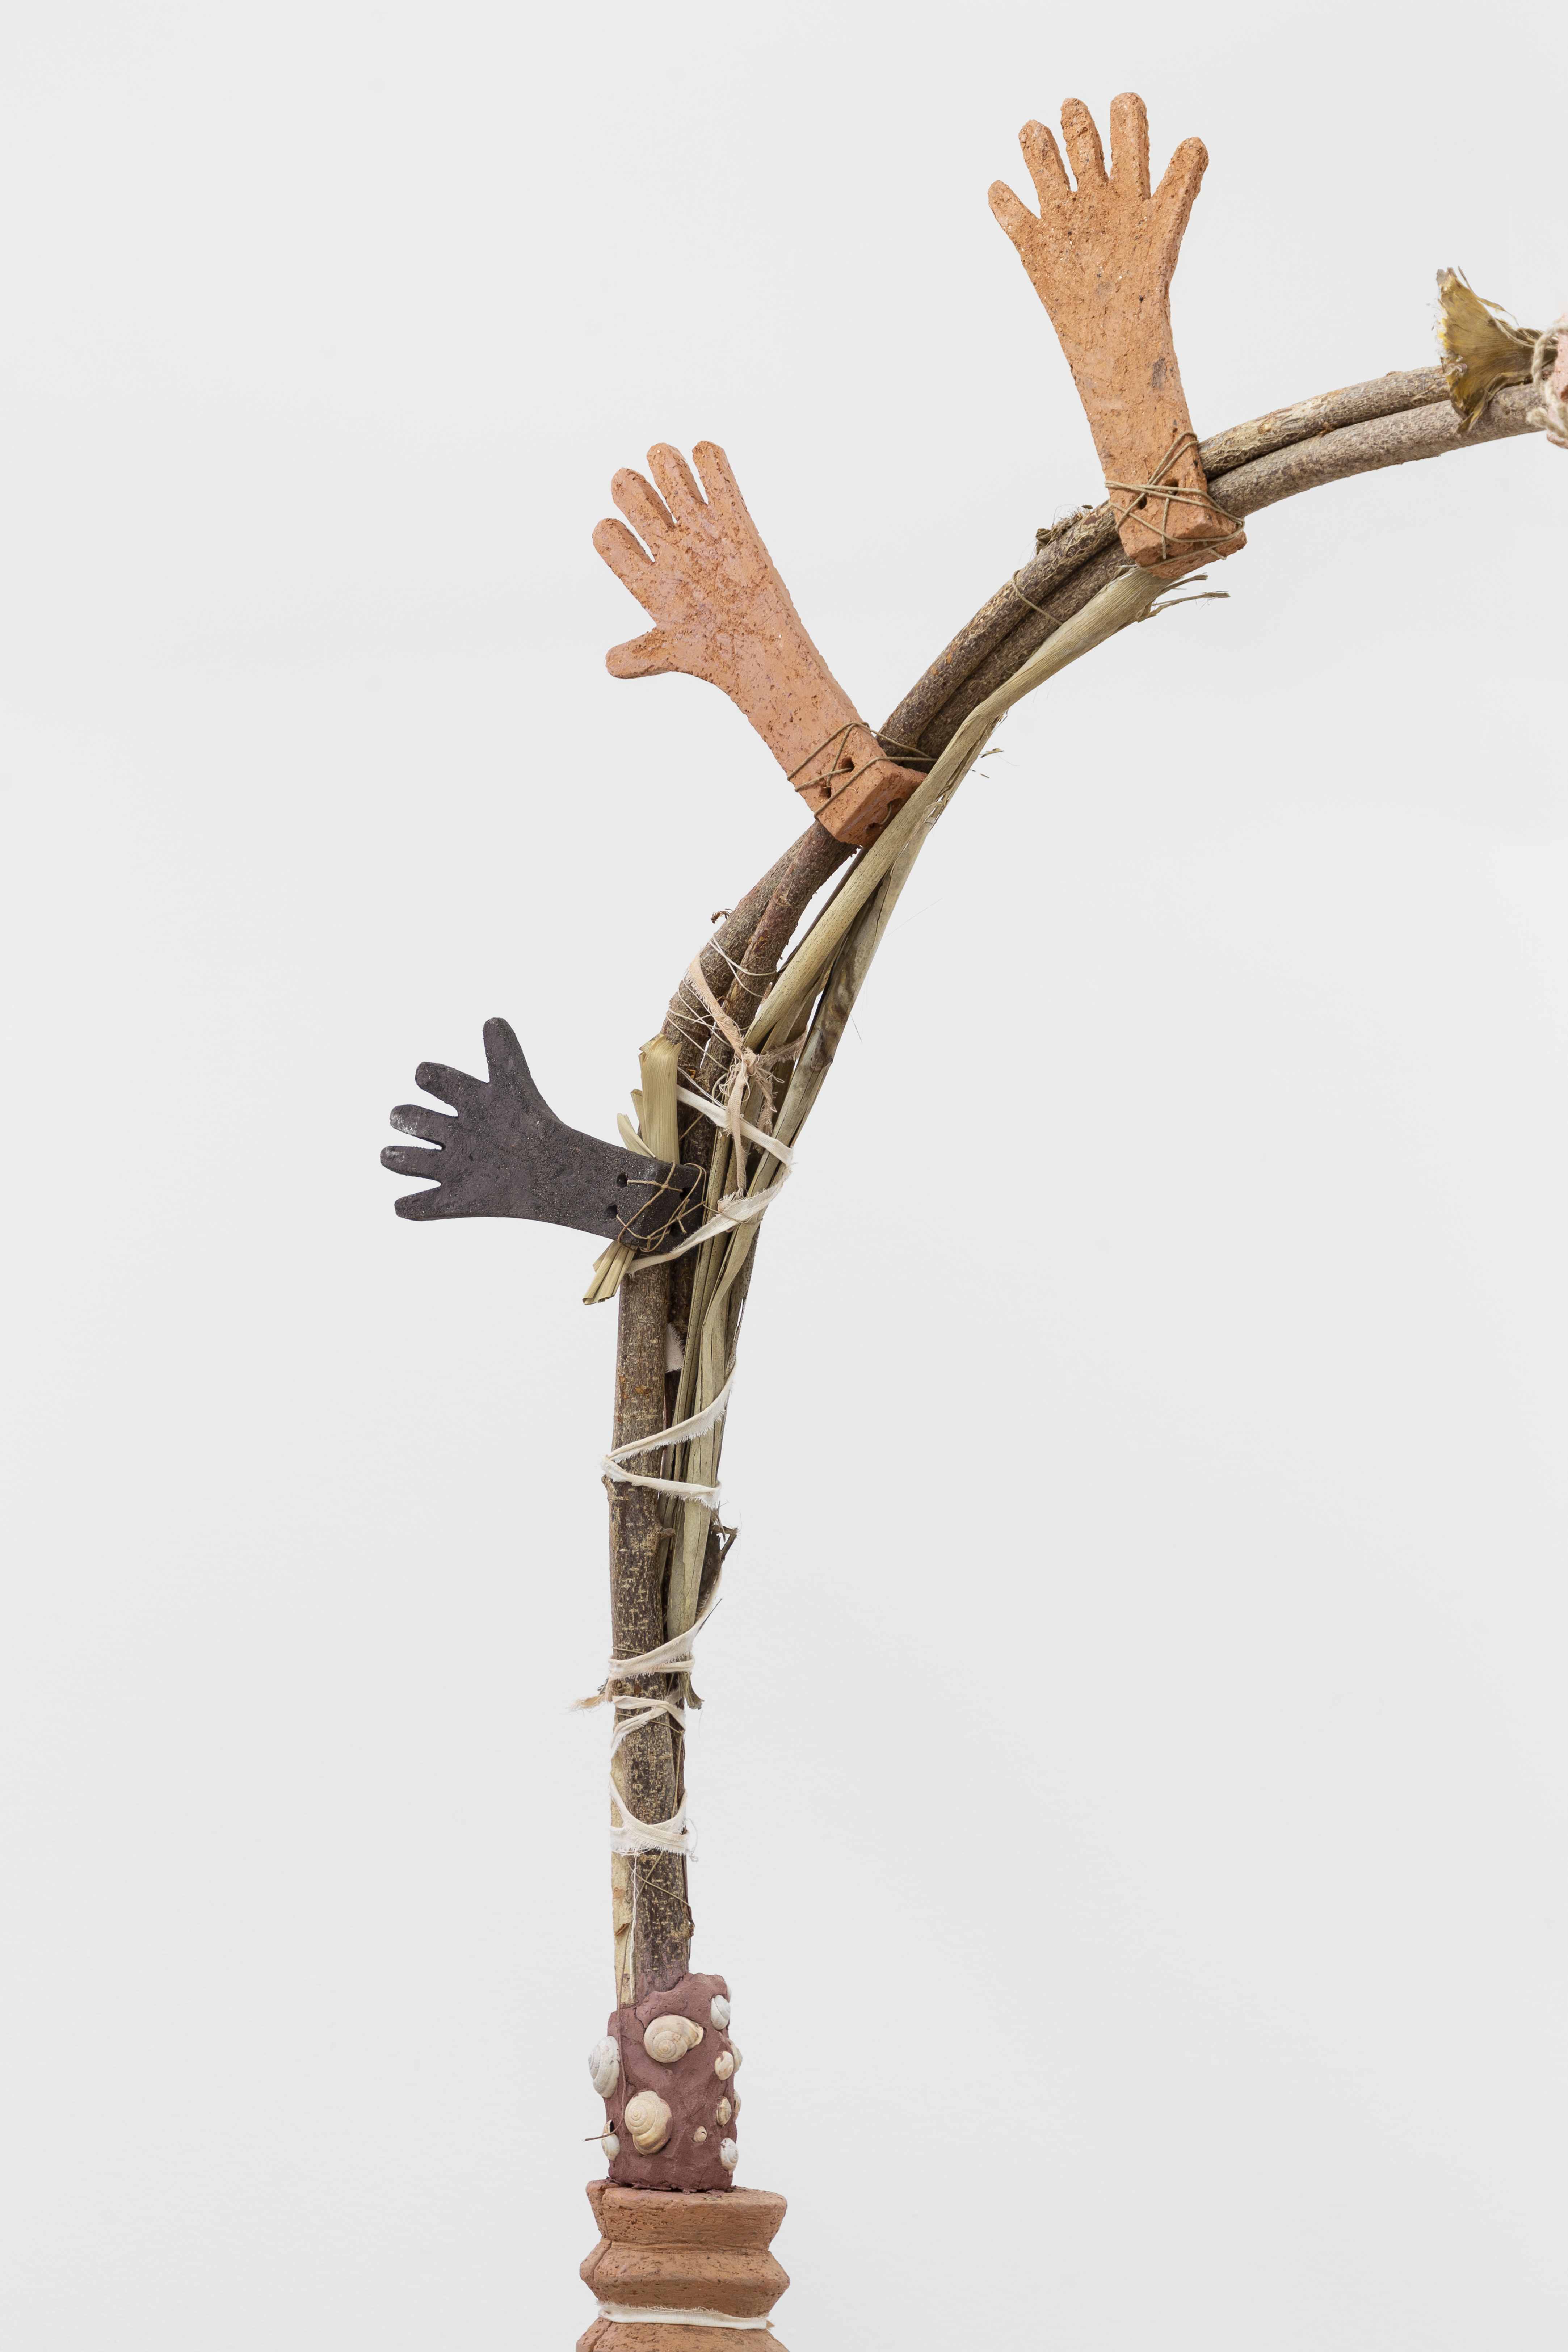 Maja Escher, "Arco da Chuva", 2022, white, black and pink stoneware, red clay, shale, copper wire, cotton fabric, cabbage seeds, snail pods, yuca leaves, linen rope, brass wire, cement, 122 x 245 cm